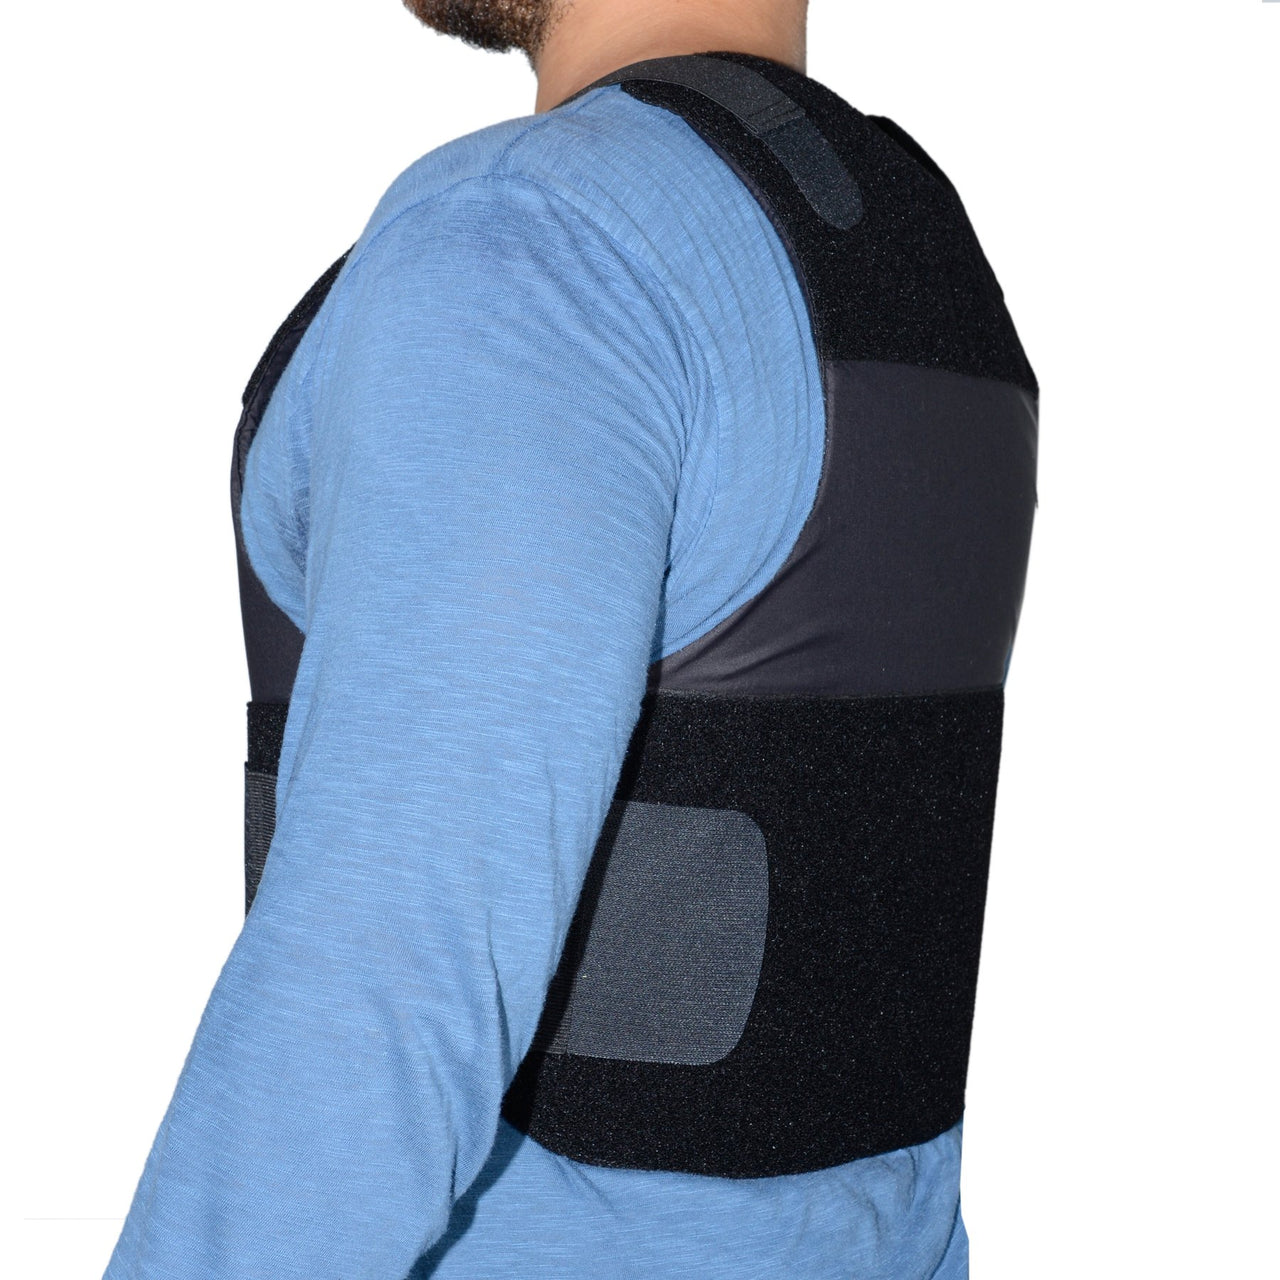 The back of a man wearing Body Armor Direct Freedom Concealable Carrier.